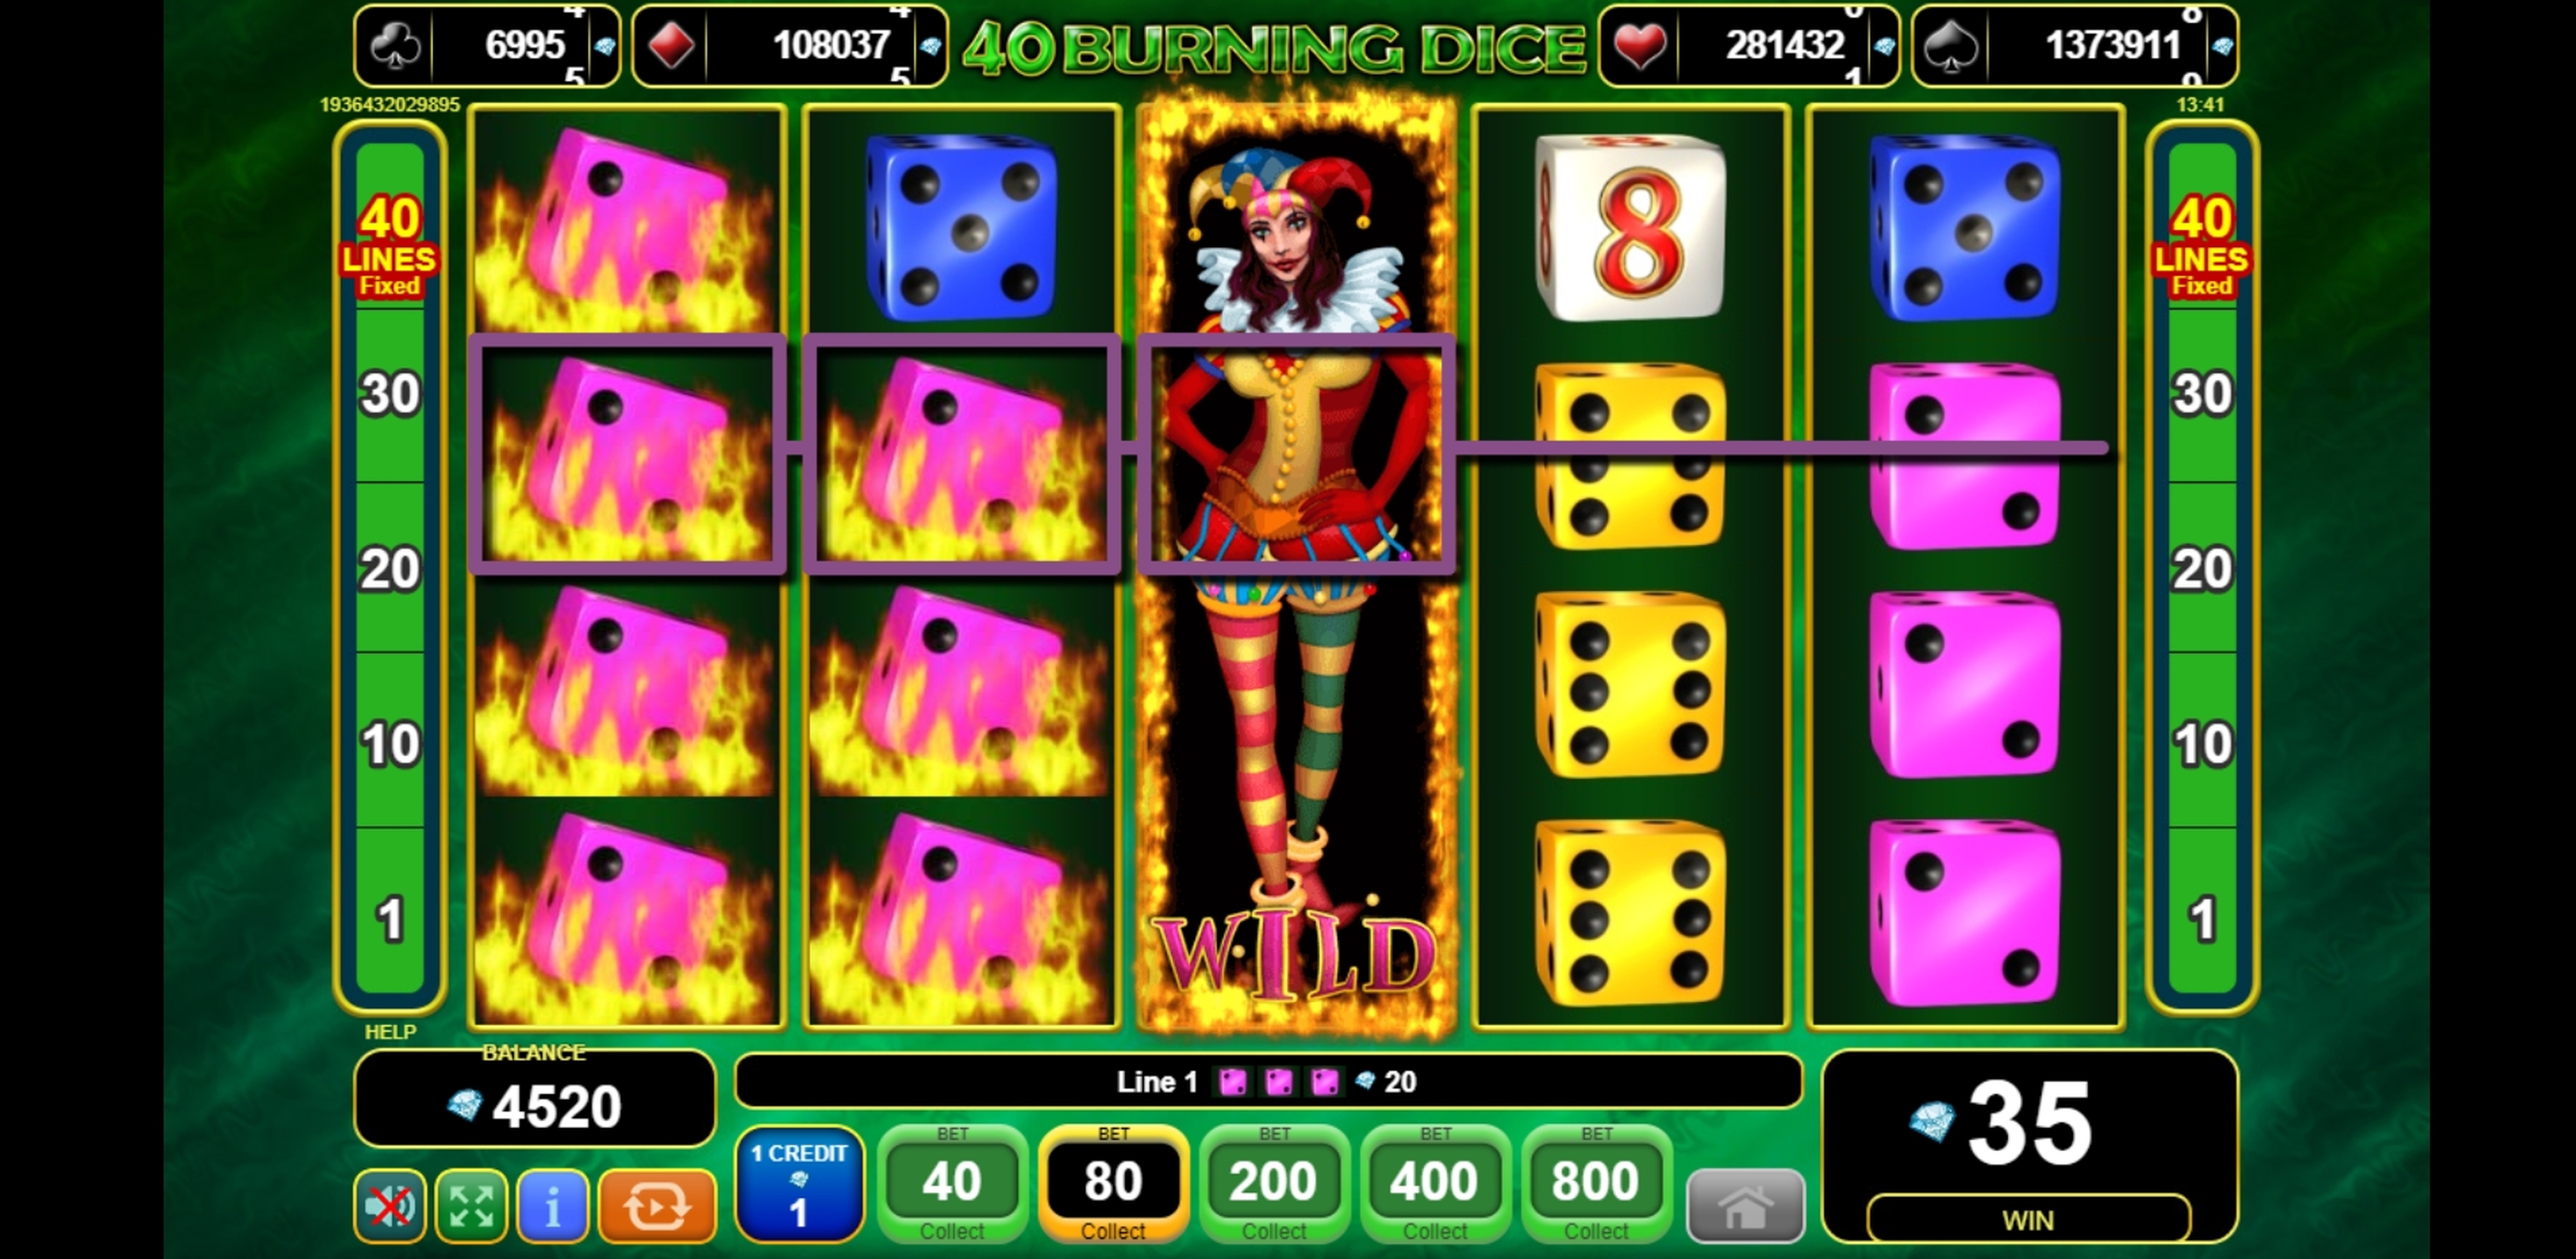 Win Money in 40 Burning Dice Free Slot Game by EGT